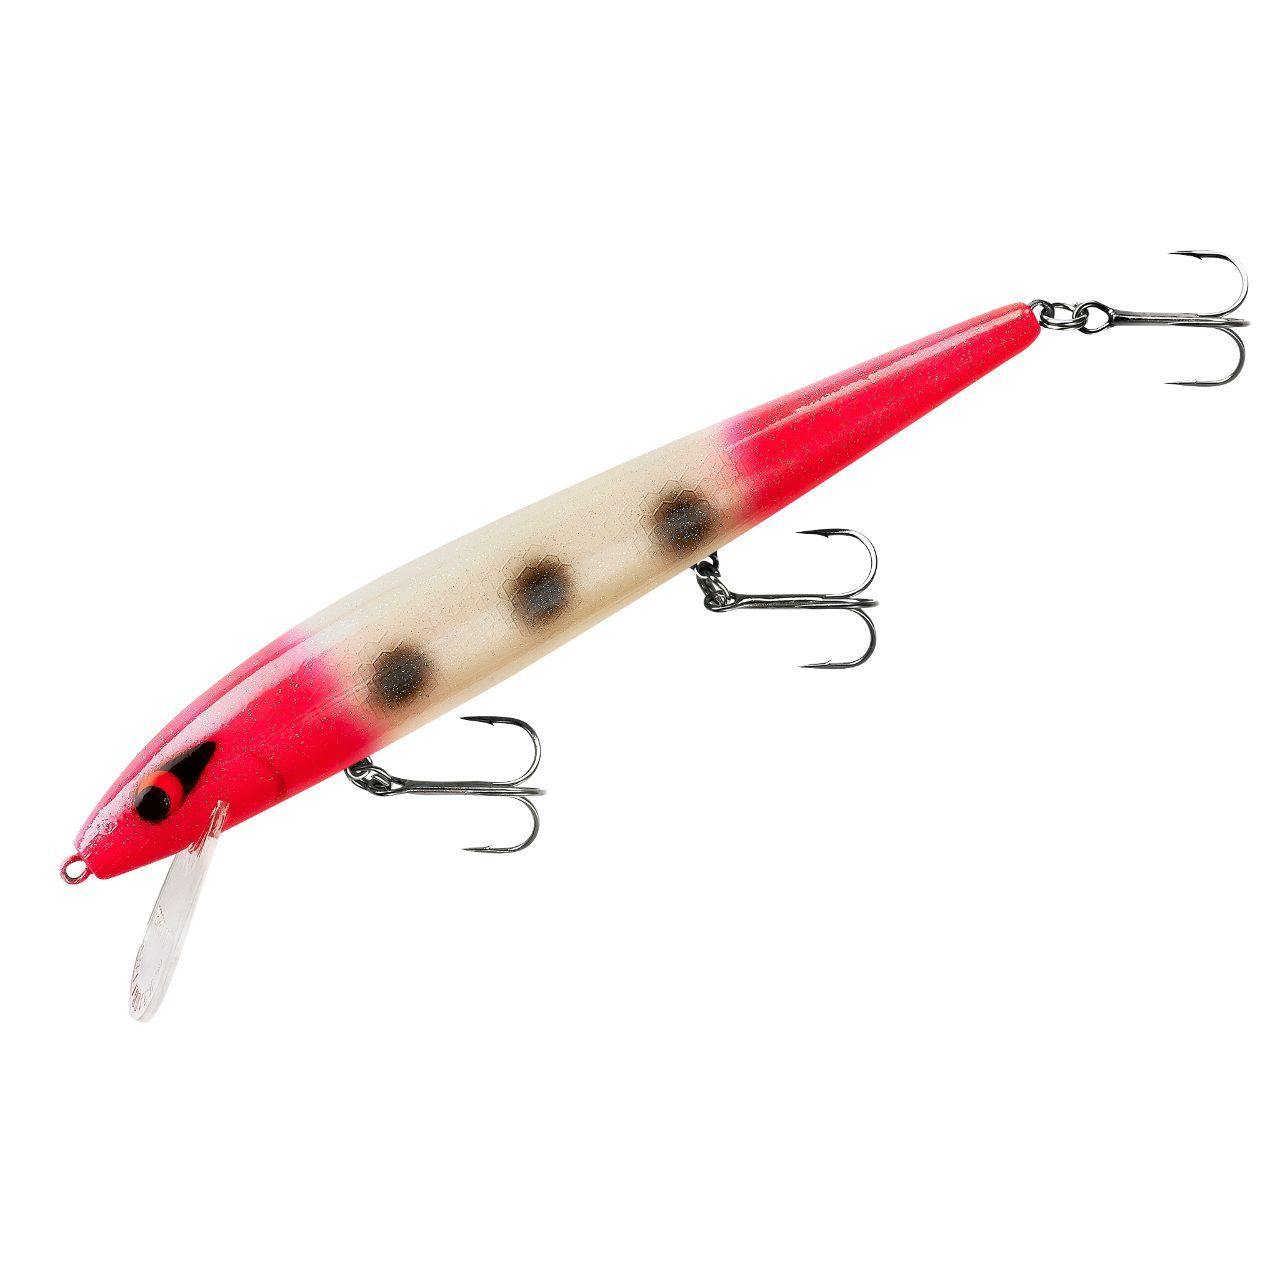 Smithwick Lures Perfect 10 Rogue Fishing Lure